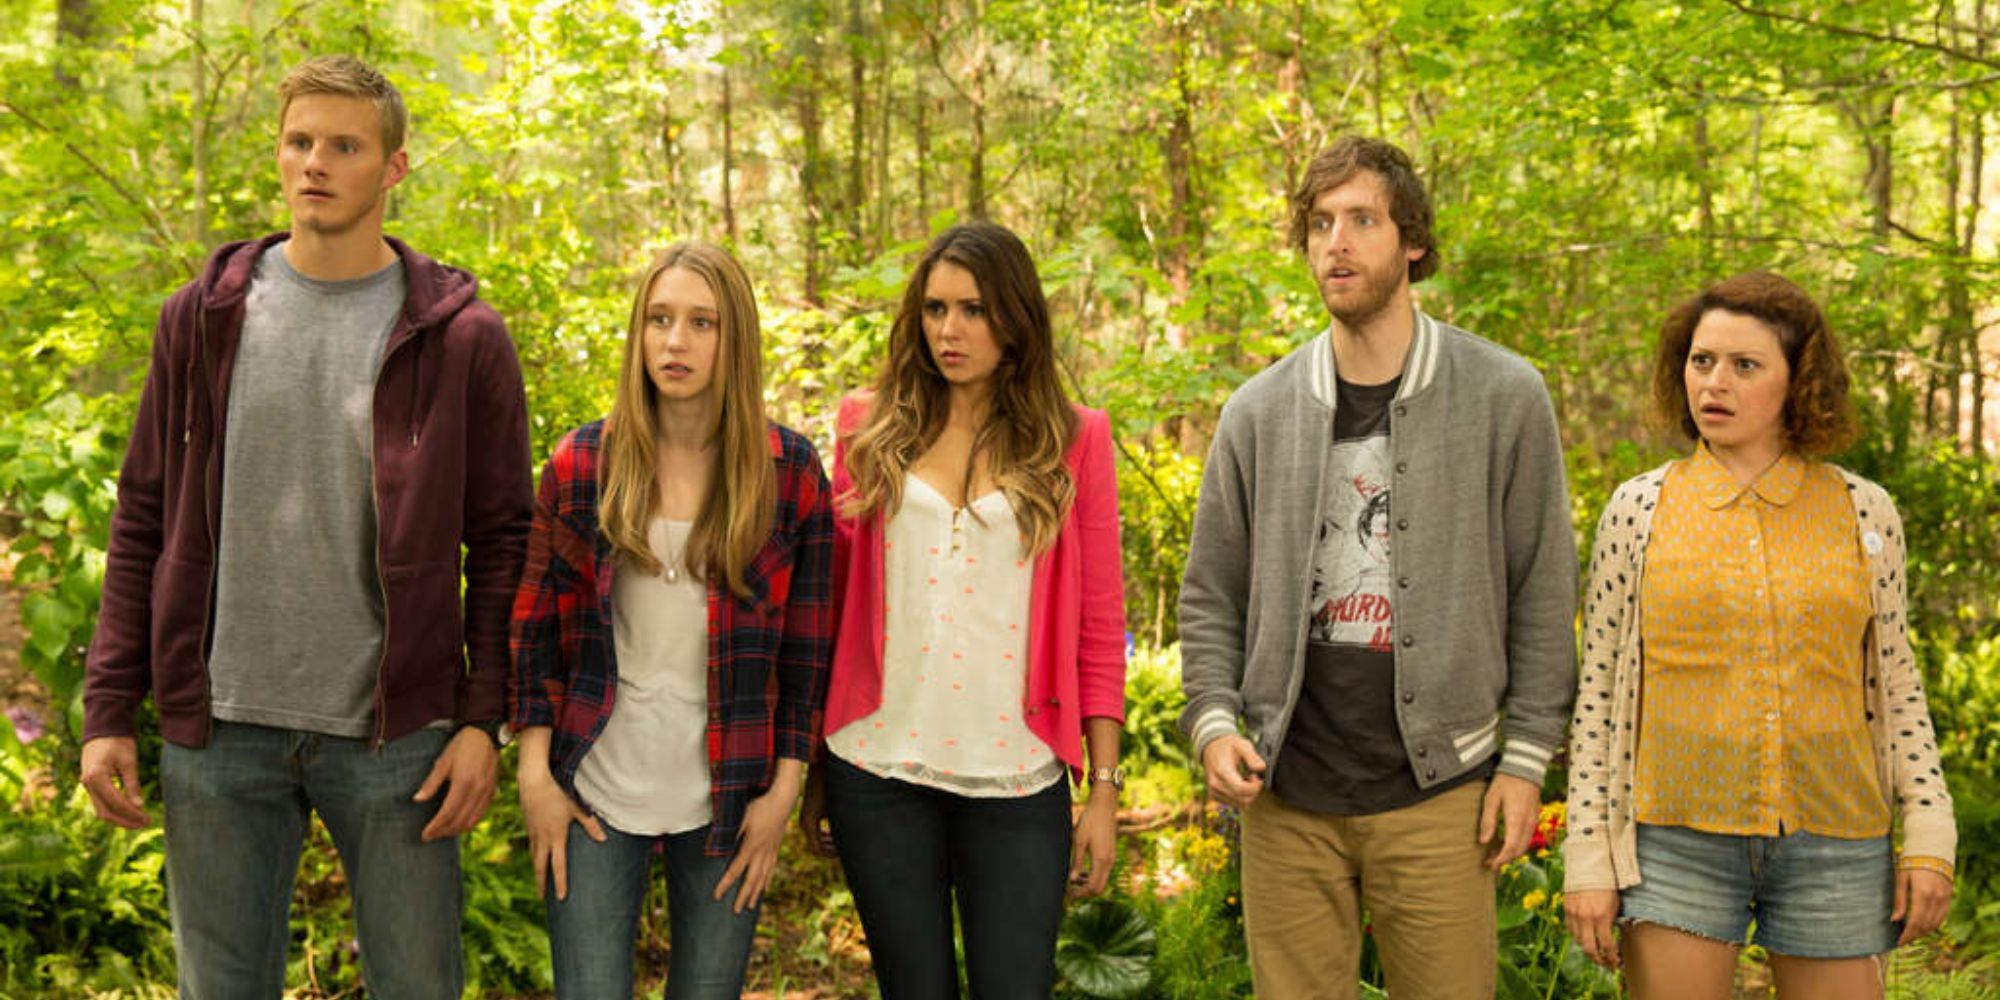 Max and her friends standing in the forest from the movie